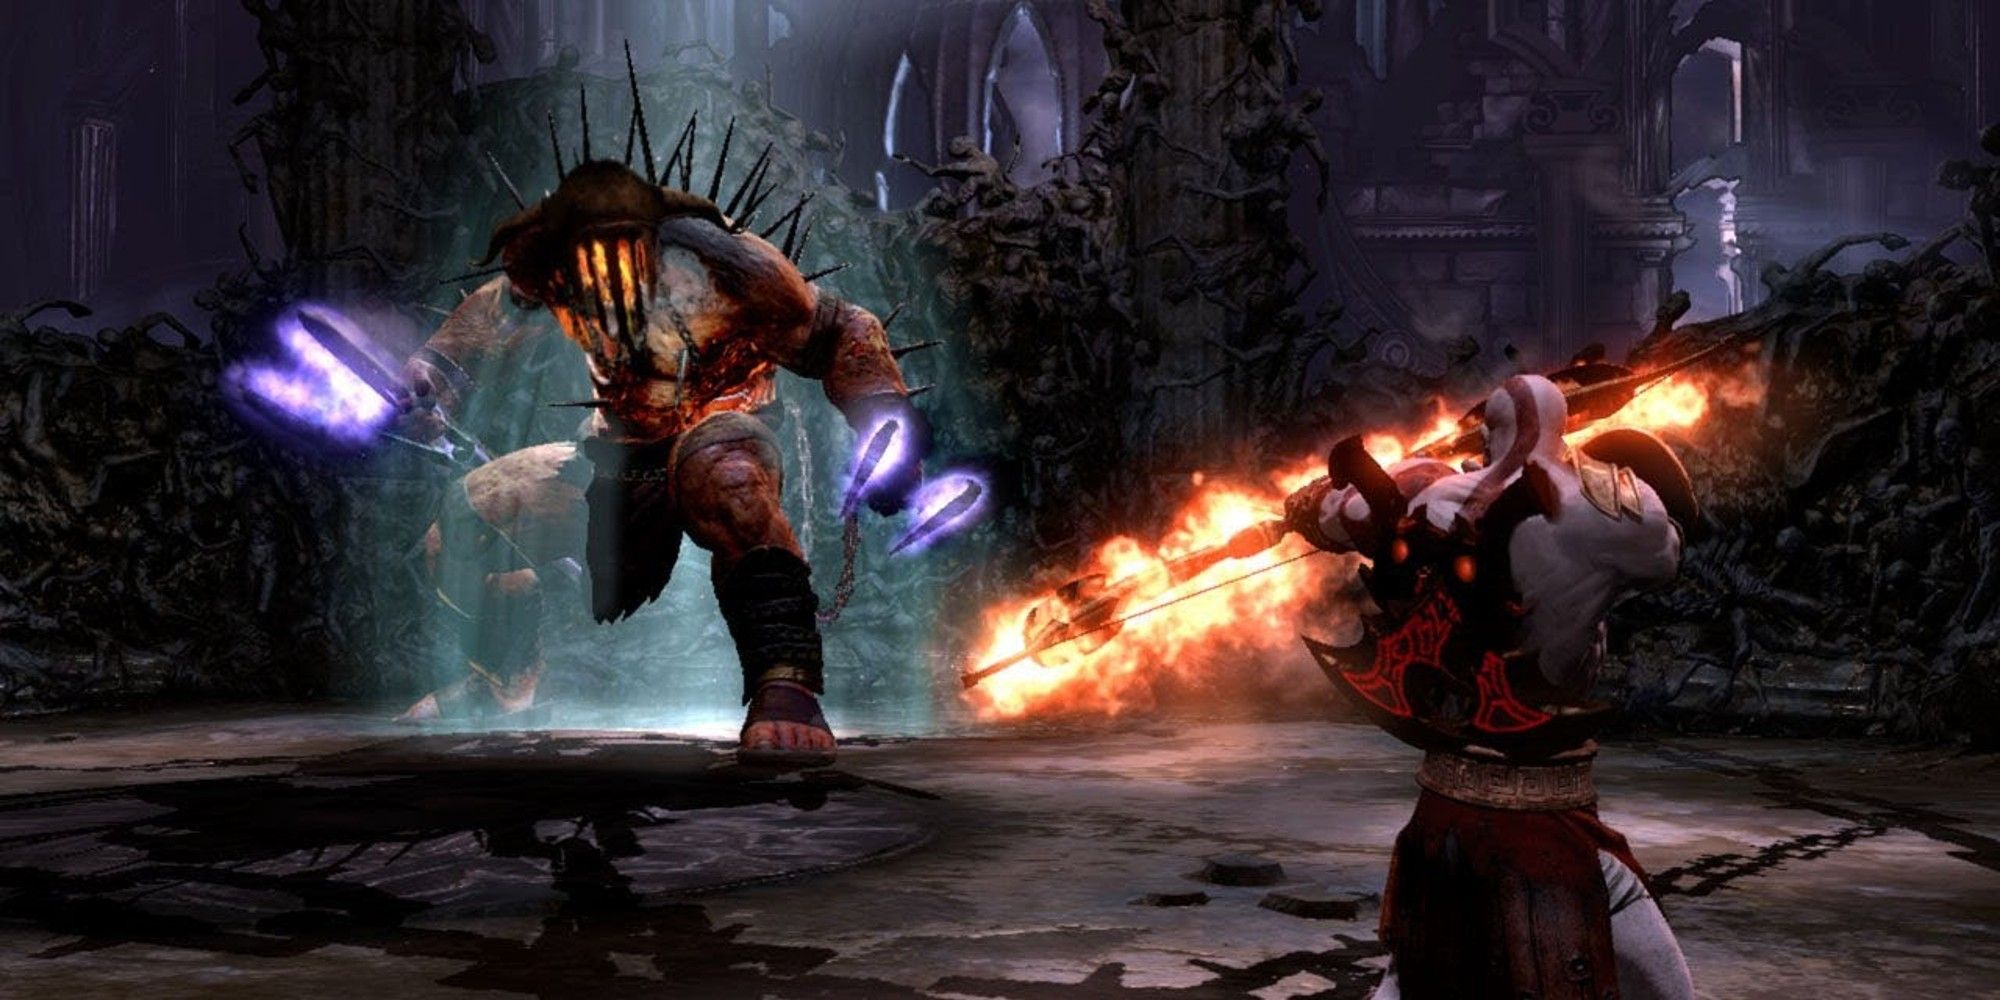 Hades from god of war 3, about to fight Kratos who'd aiming with his bow